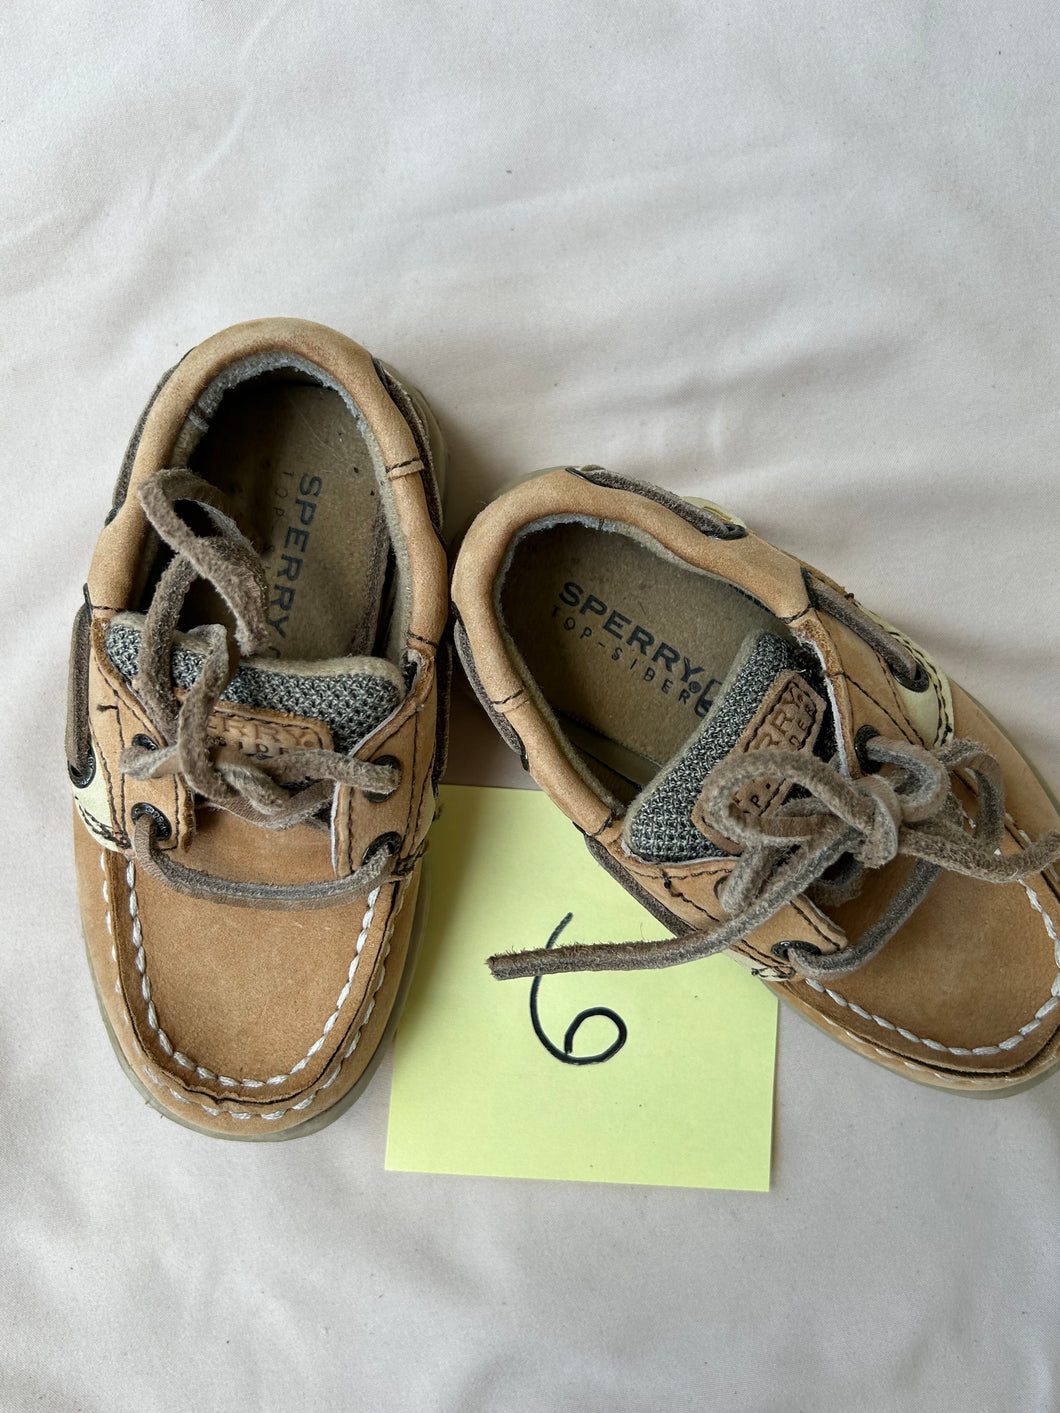 sperry brand brown leather loafer size 6 ages 18-24 months 18 months